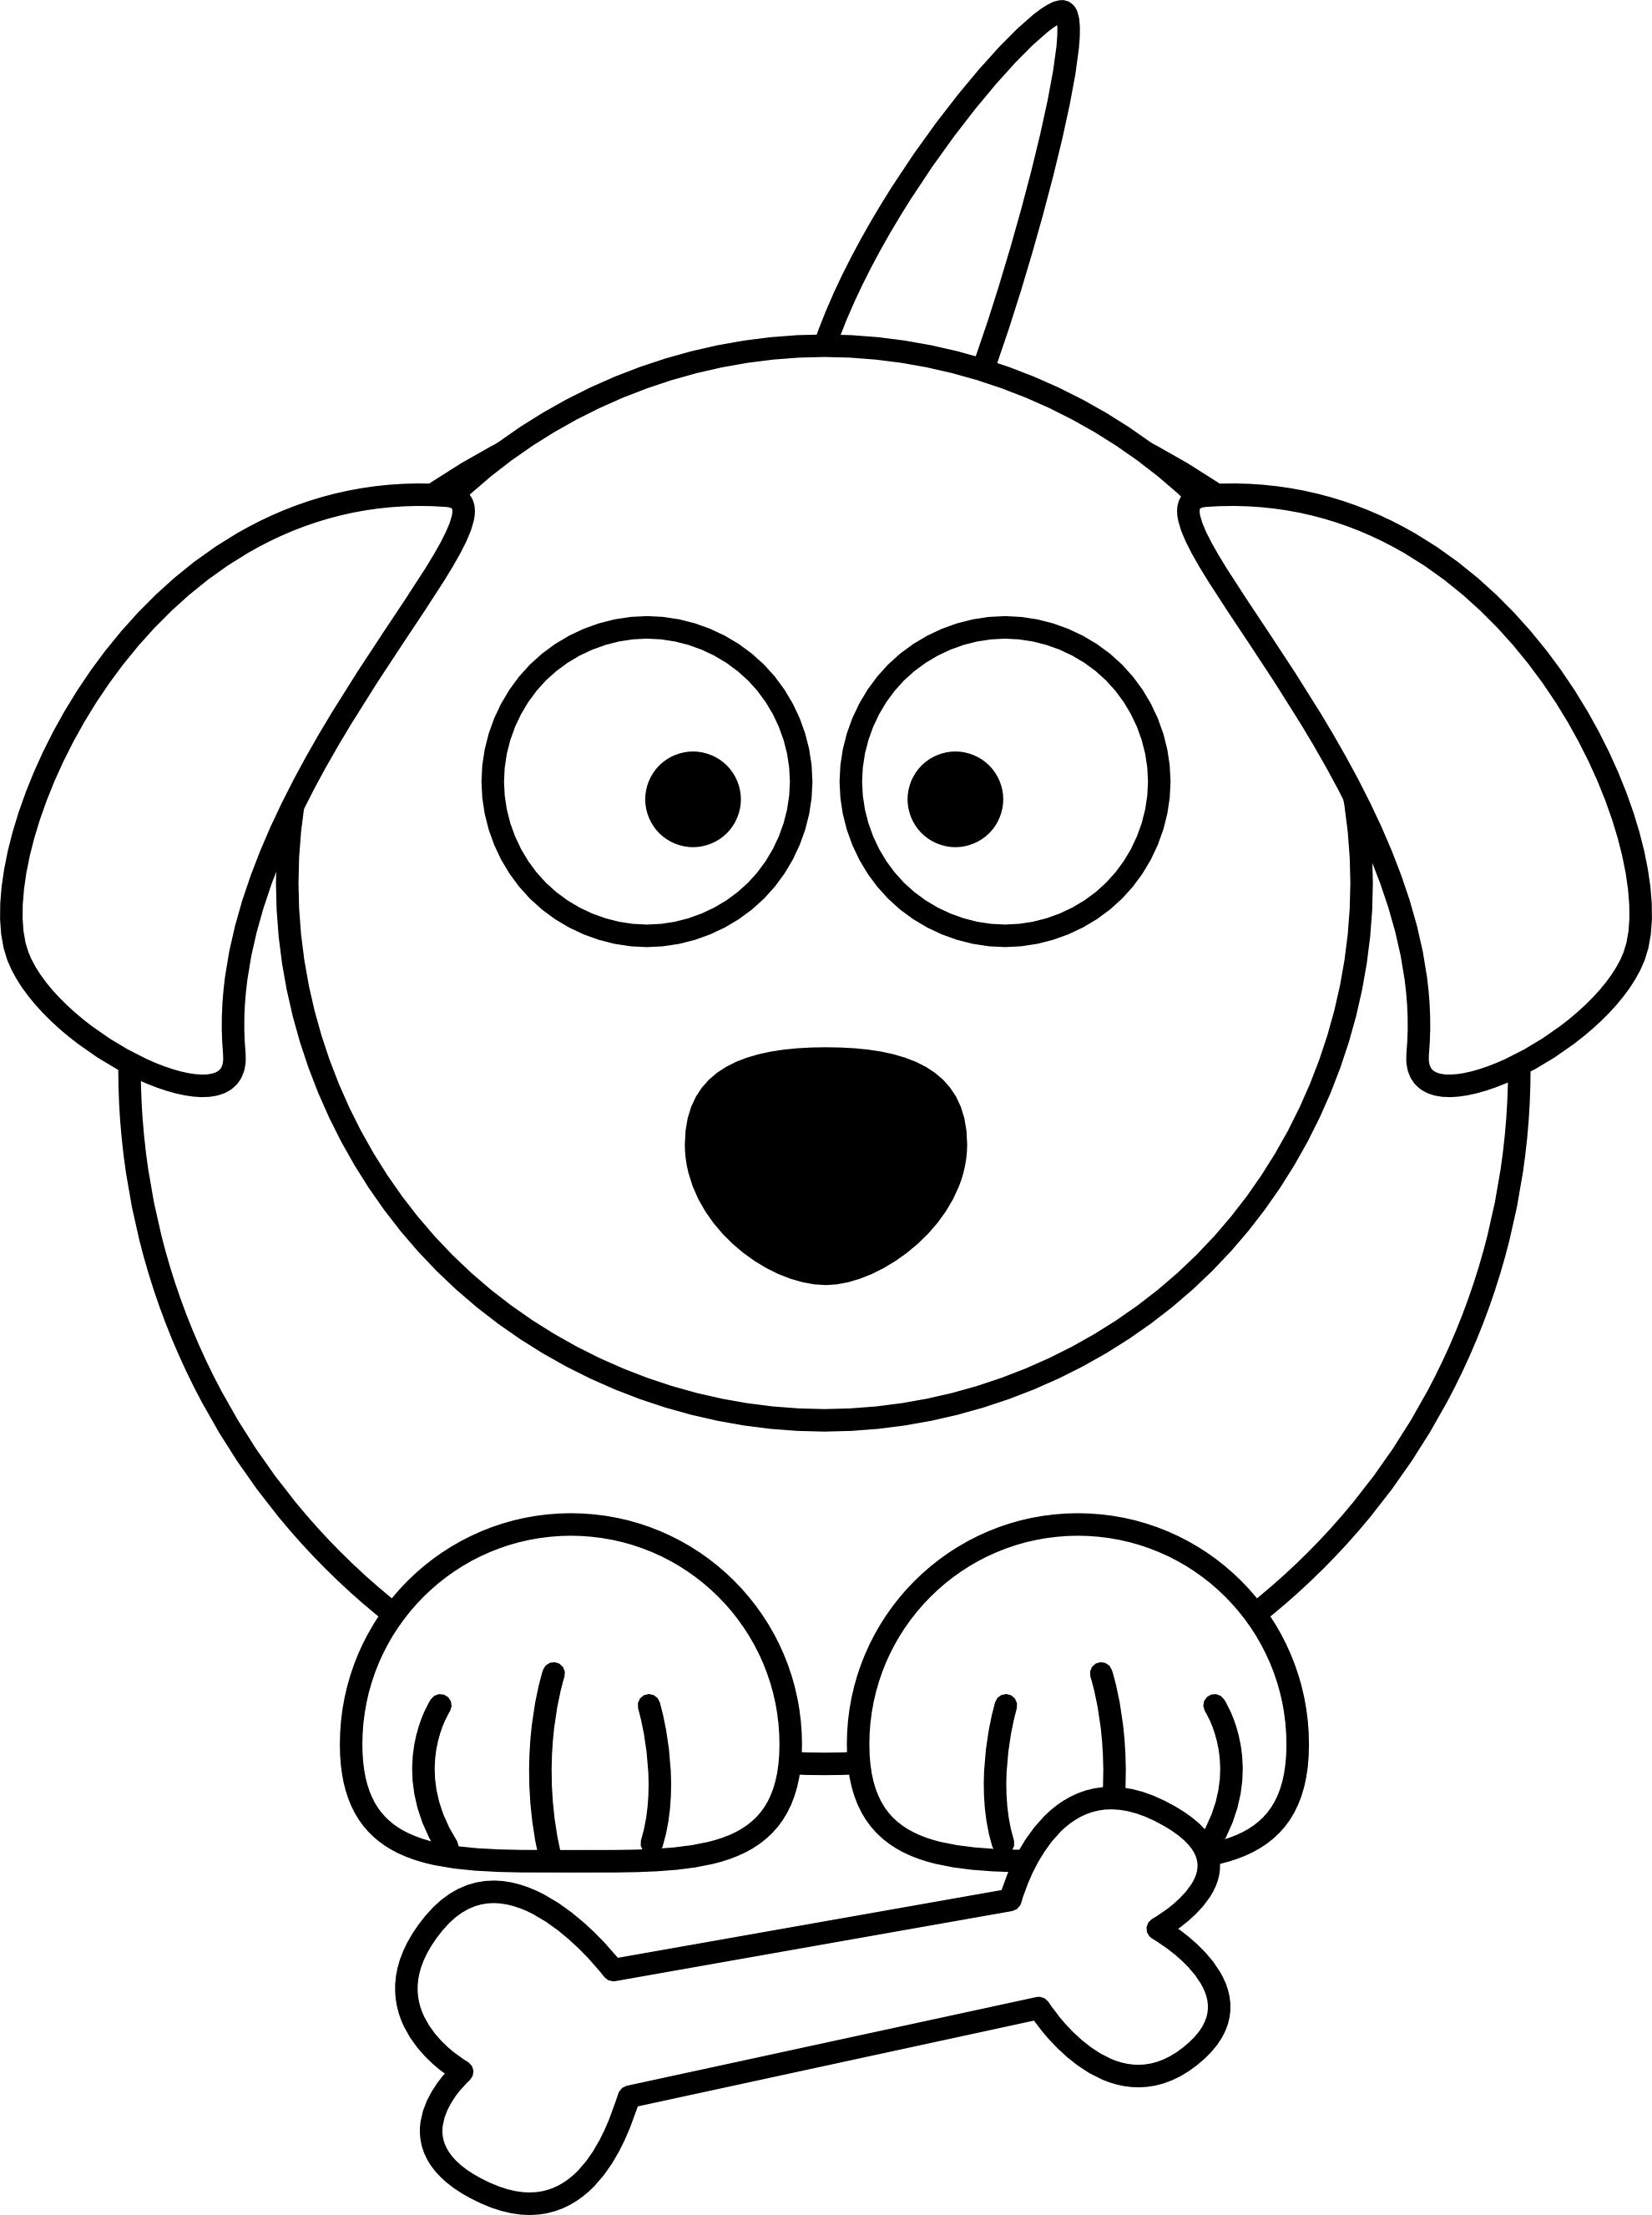 Images For > Black And White Dog Cartoon